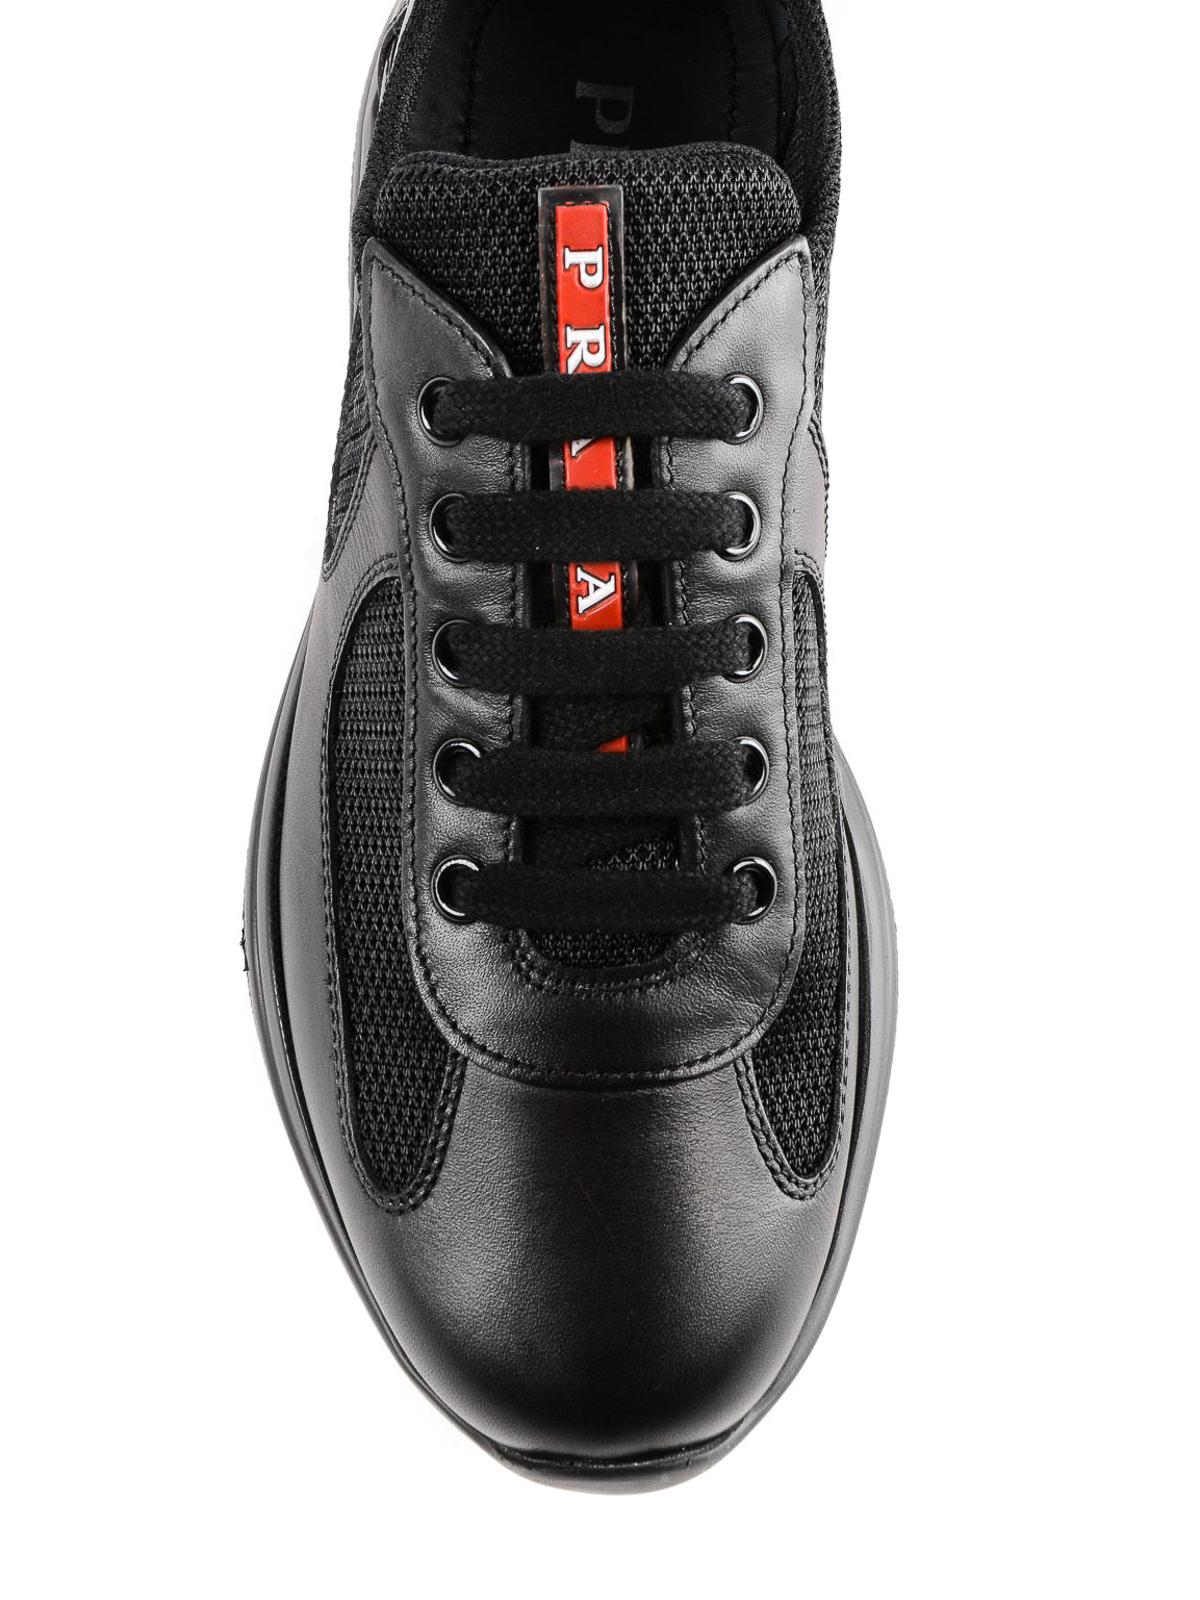 prada fabric and leather sneakers